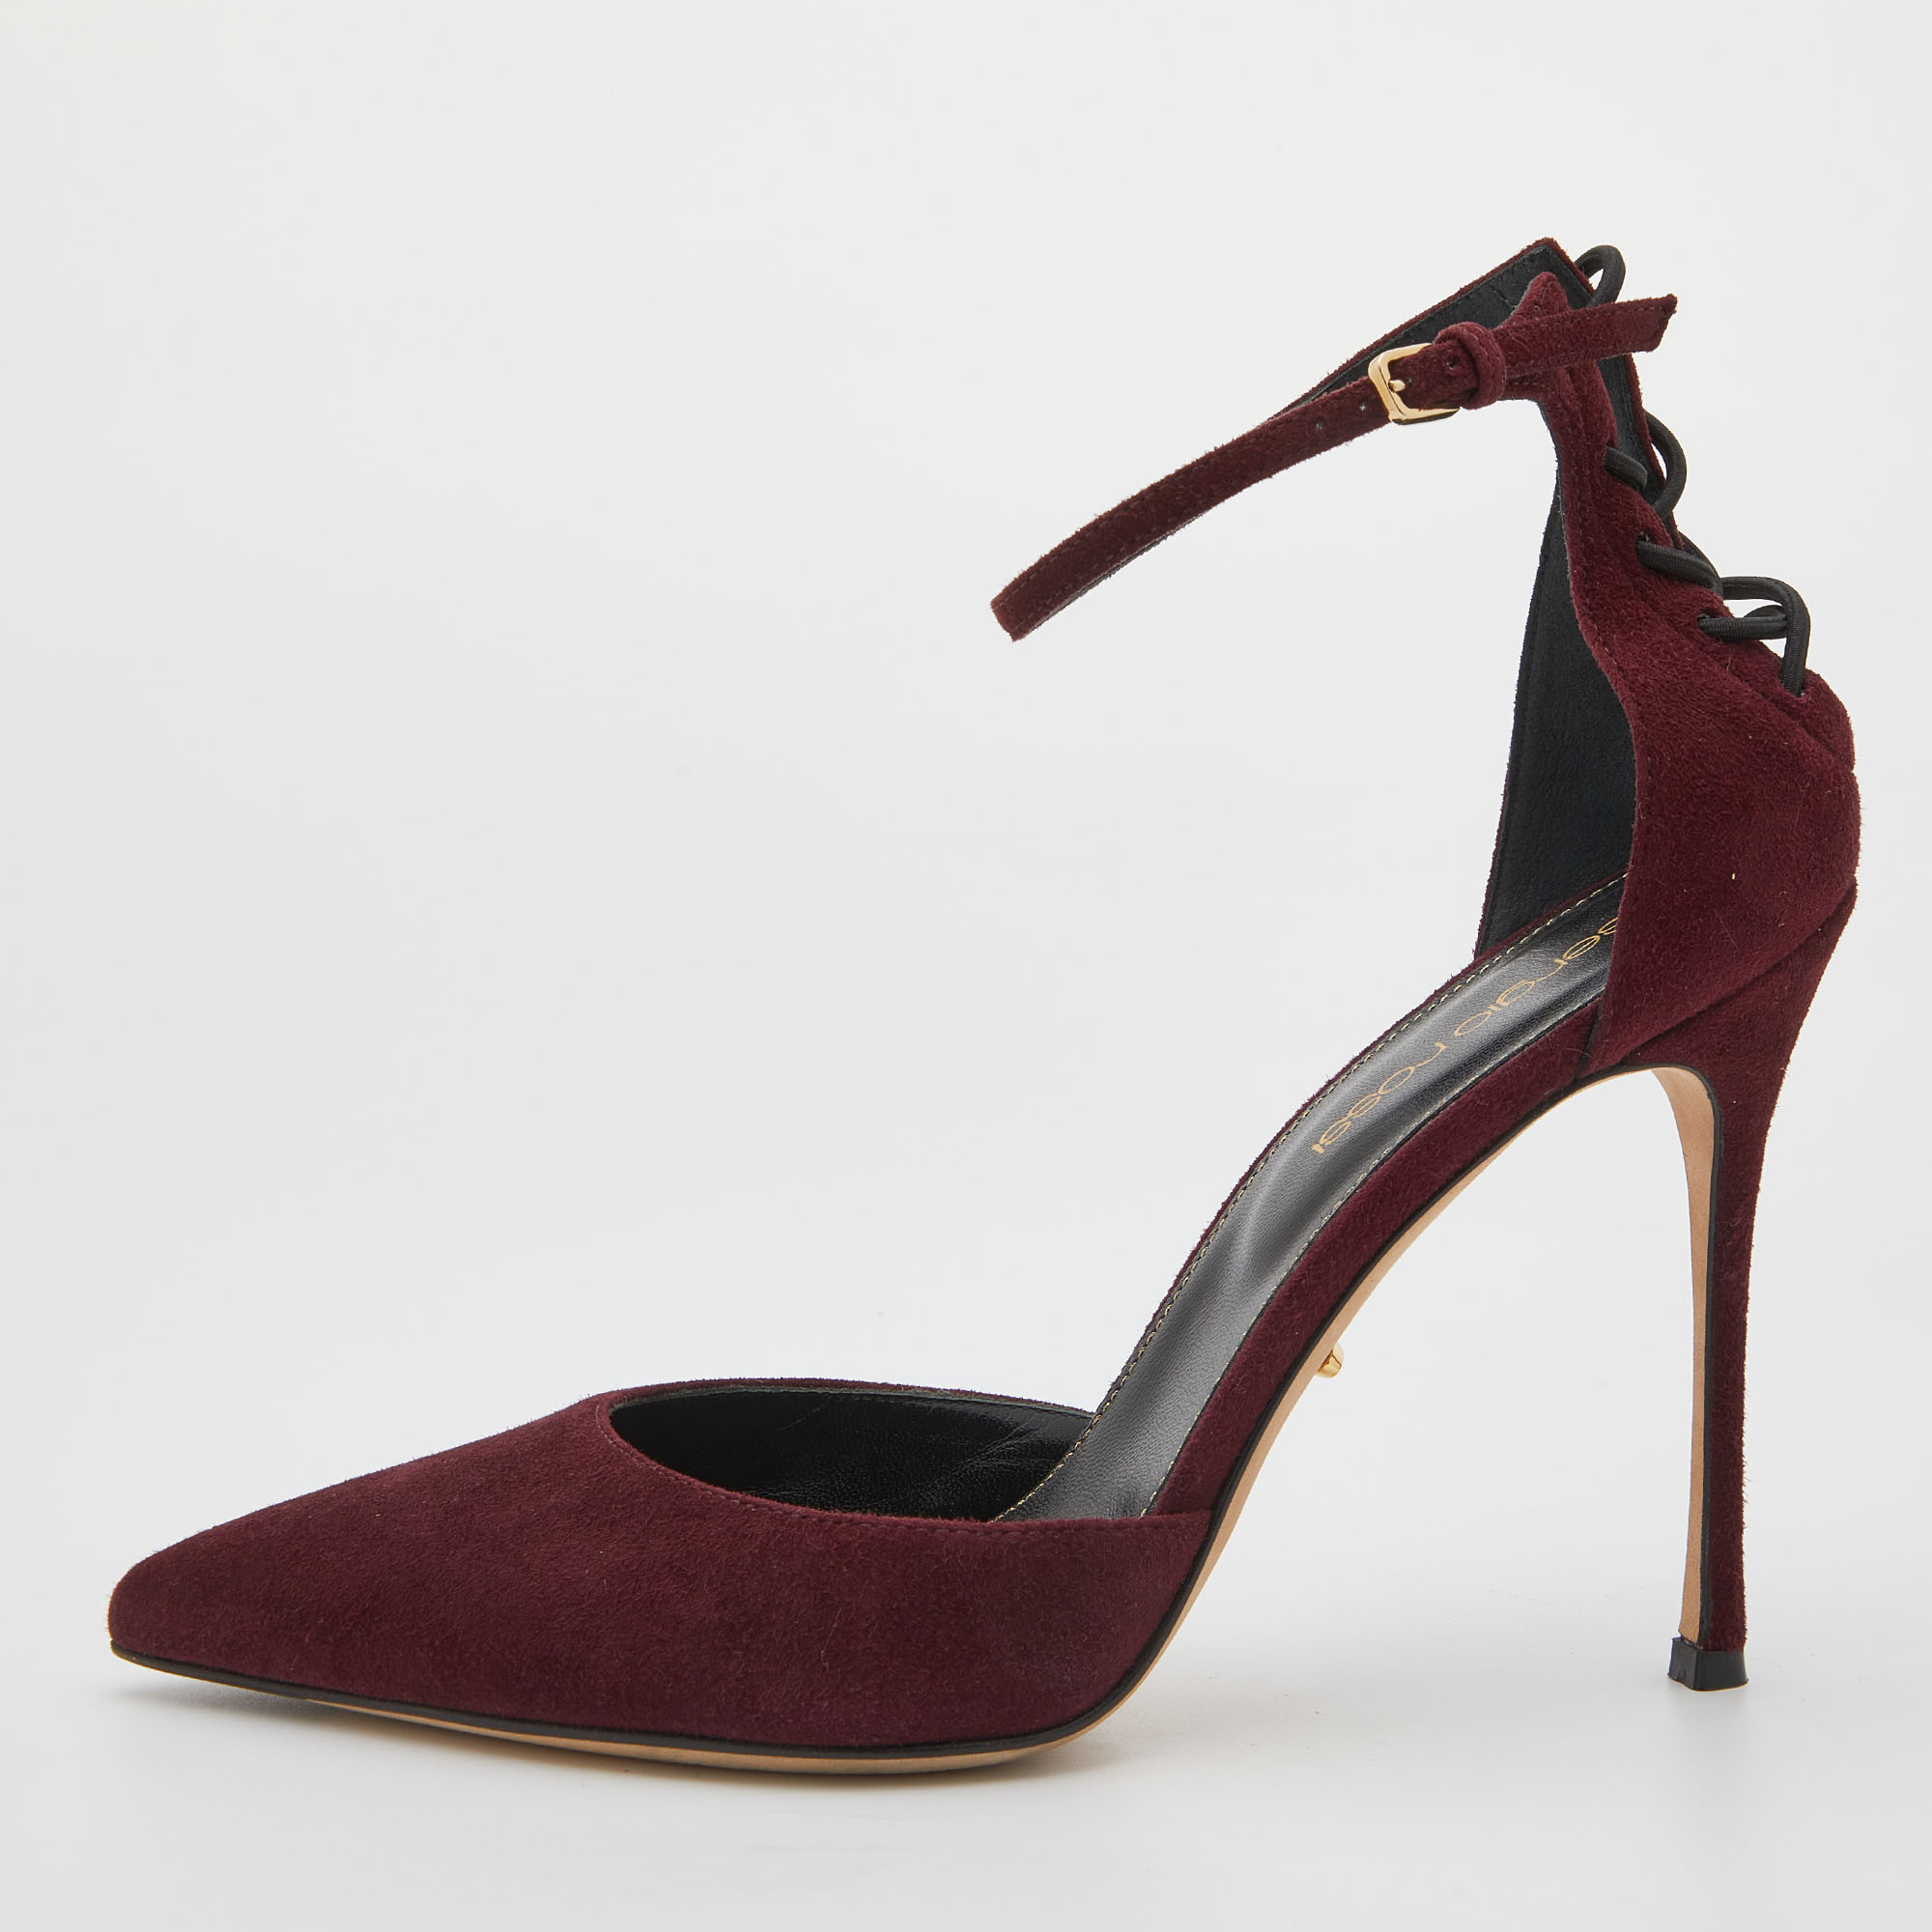 Pre-owned Gianvito Rossi Burgundy Suede Pointed Toe Ankle Strap Sandals Size 37